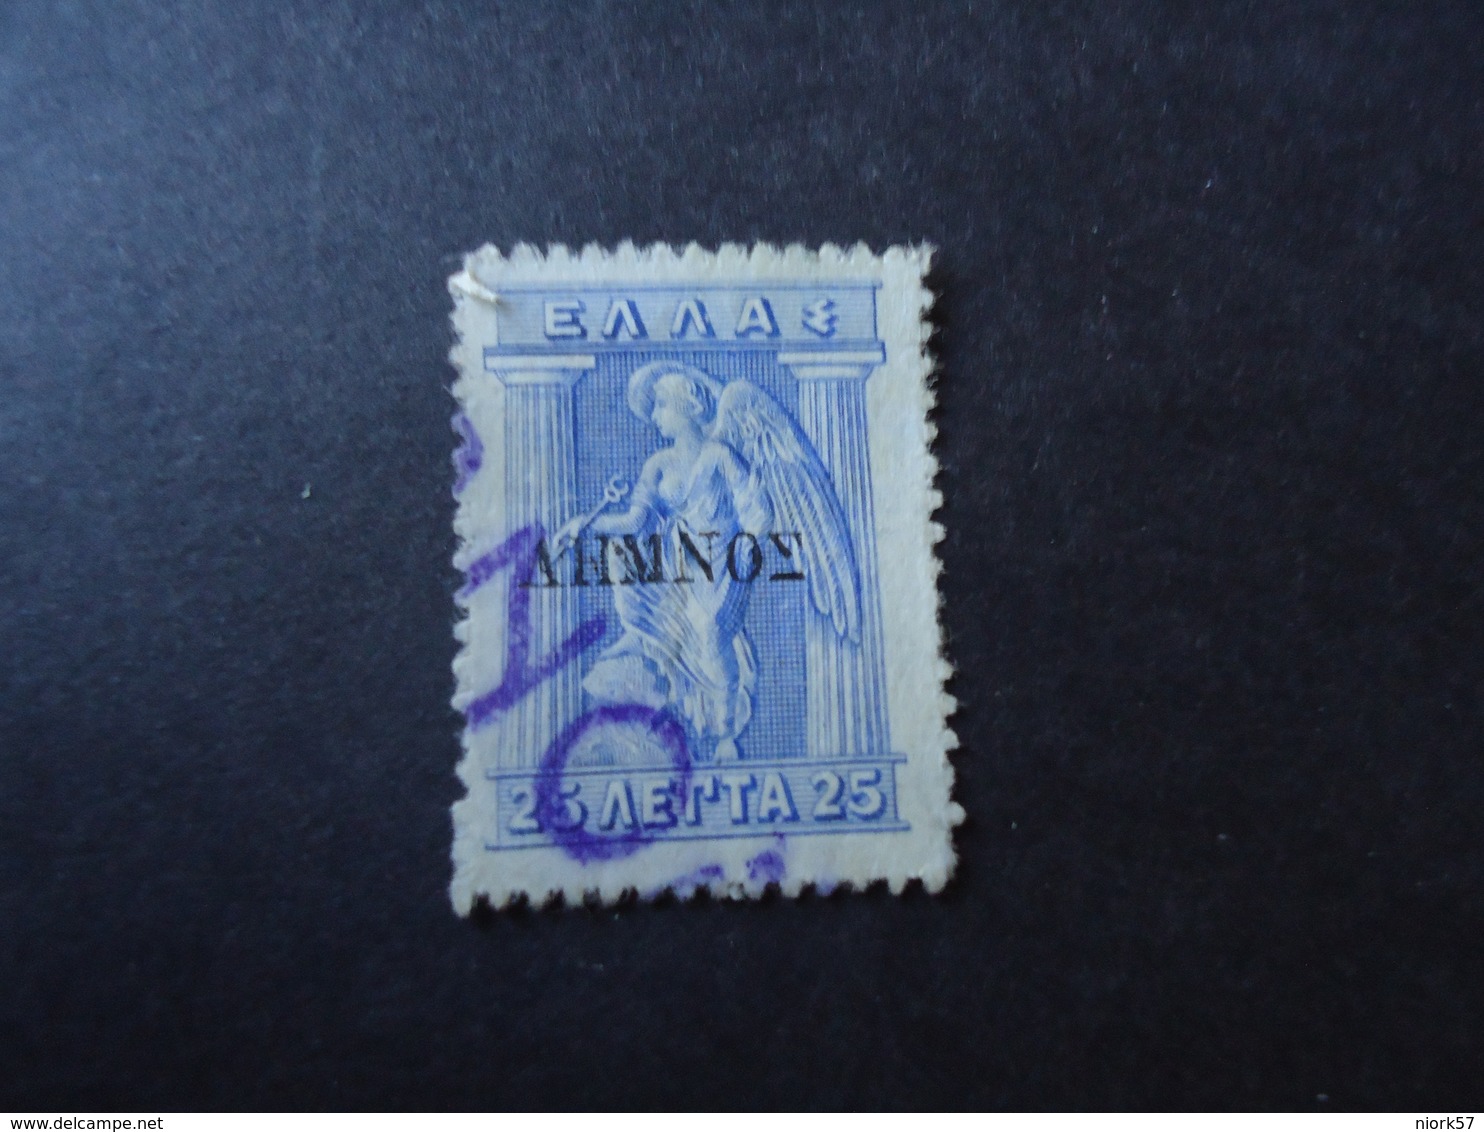 CRETE LEMNOS  GREECE USED STAMPS   WITH POSTMARK  RETHYMNON - Non Classificati